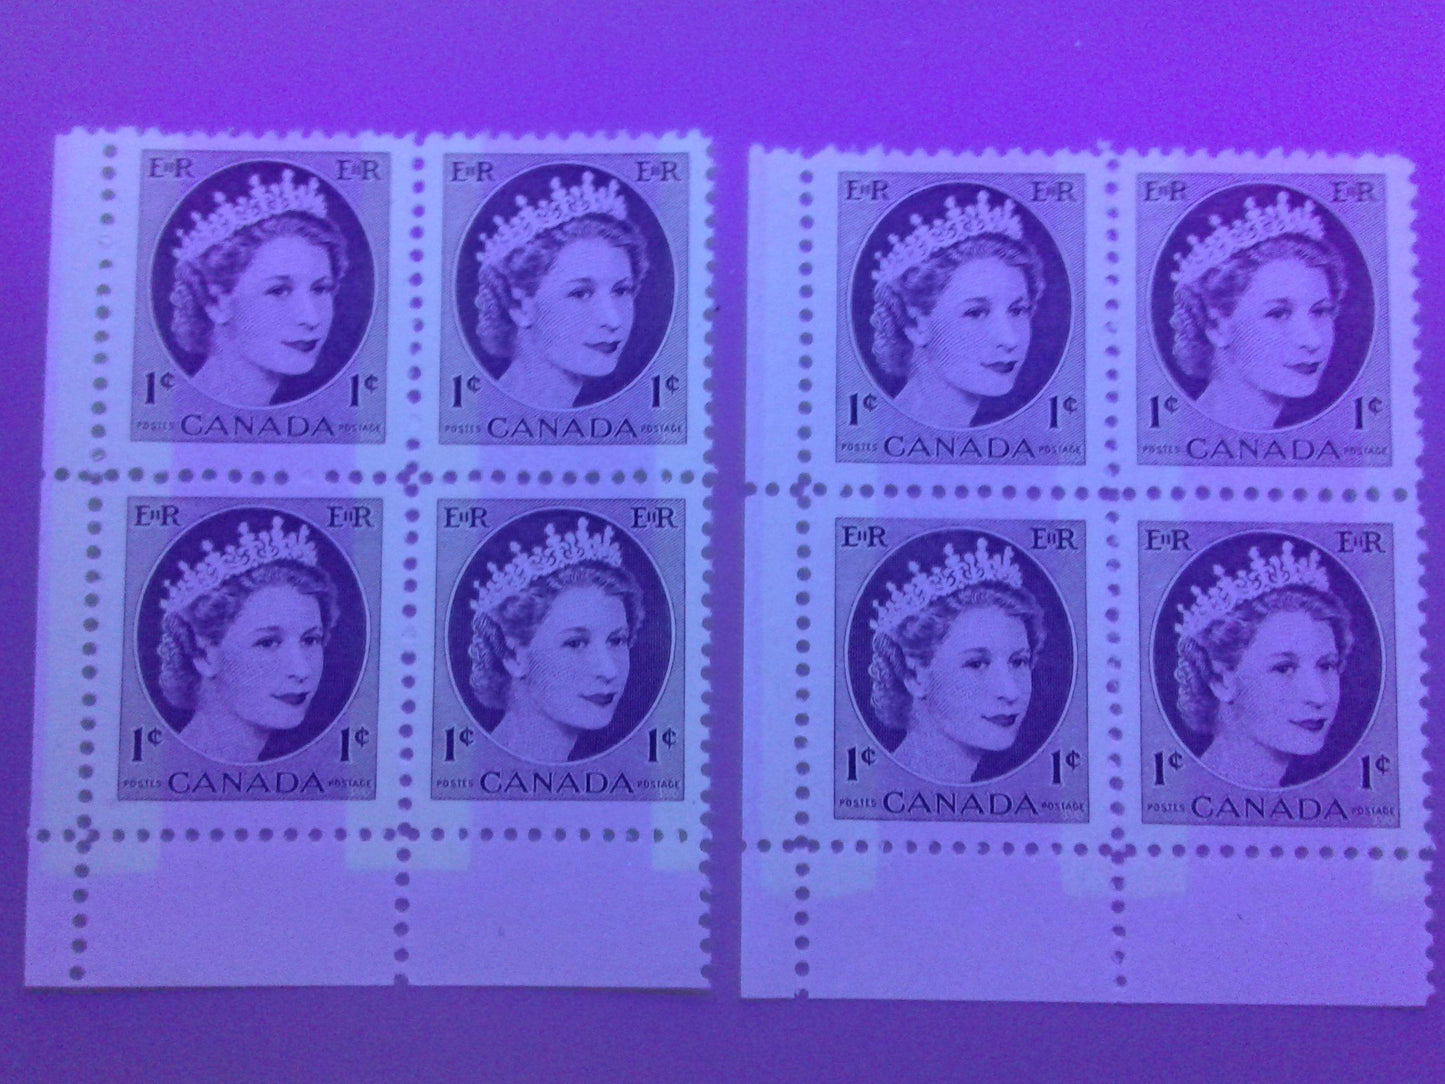 Canada #337p(var) 1c Chocolate Queen Elizabeth II, 1954-1962 Wilding Issue, Lower Left Blank Winnipeg Tagged Blocks of 4, Five Different, Various Perfs., DF Gr Vertically Ribbed Paper, Streaky Semi Gloss Gum, Bluish White Tagging, Broken Perf. Pins, VFNH Brixton Chrome 